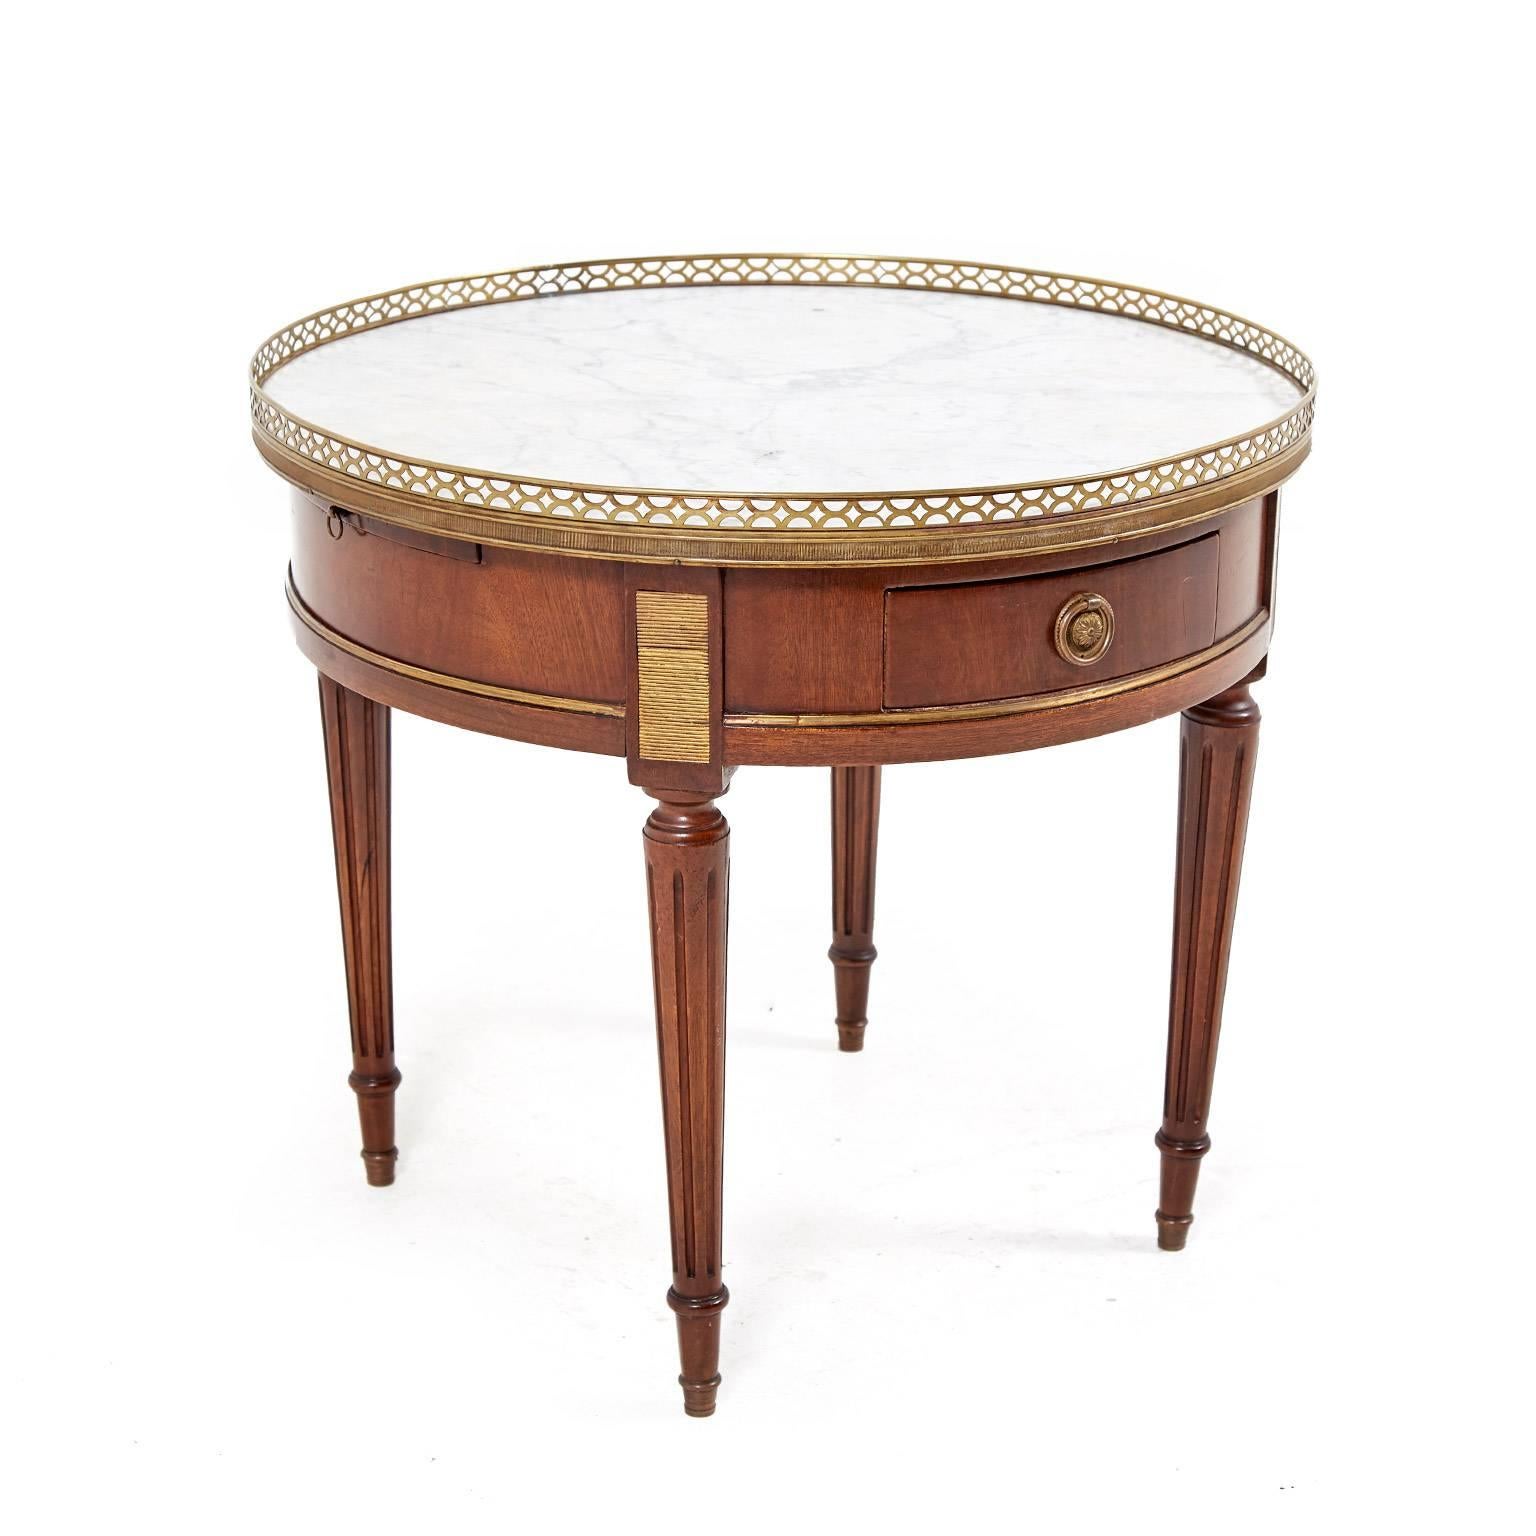 Small French marble-top, Louis XVI-style, round mahogany coffee table with two drawers and two pull-out surfaces. The marble is enhanced by a delicate brass gallery, circa 1920. Its perfect size makes it ideal for any number of locations throughout